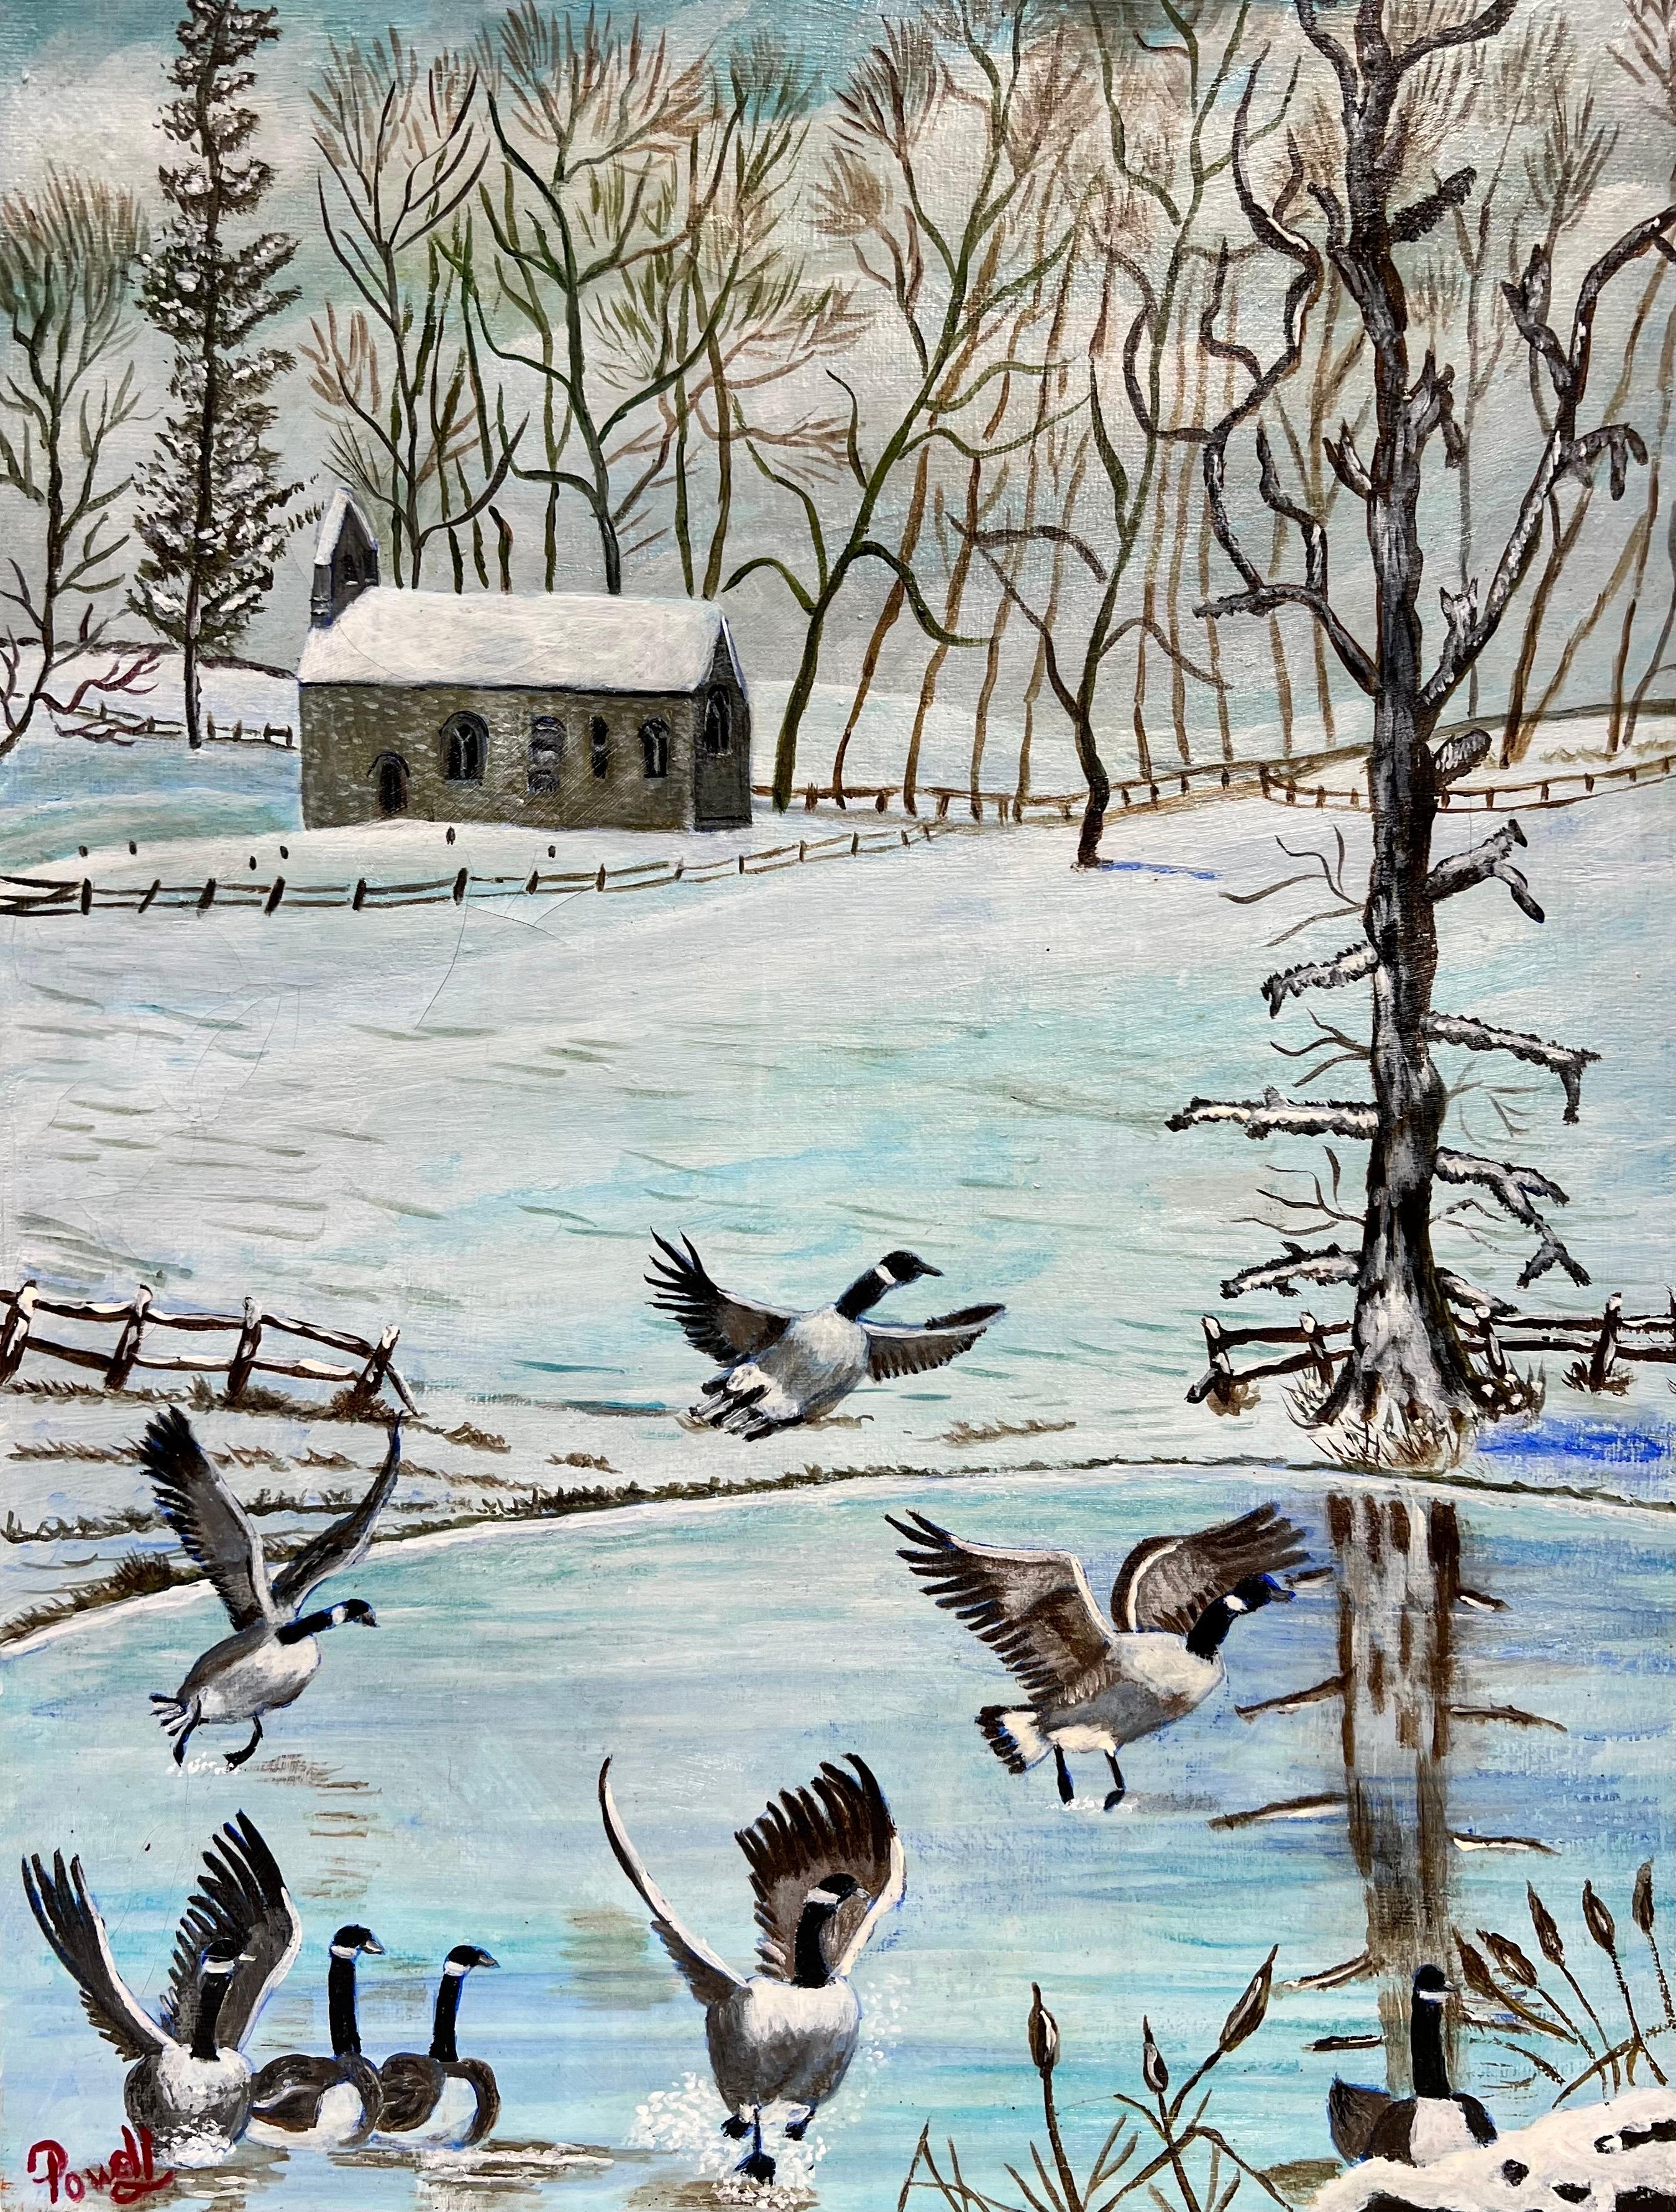 Ben Powell Landscape Painting - British Modern Oil Painting Geese in Winter Landscape on Frozen Lake